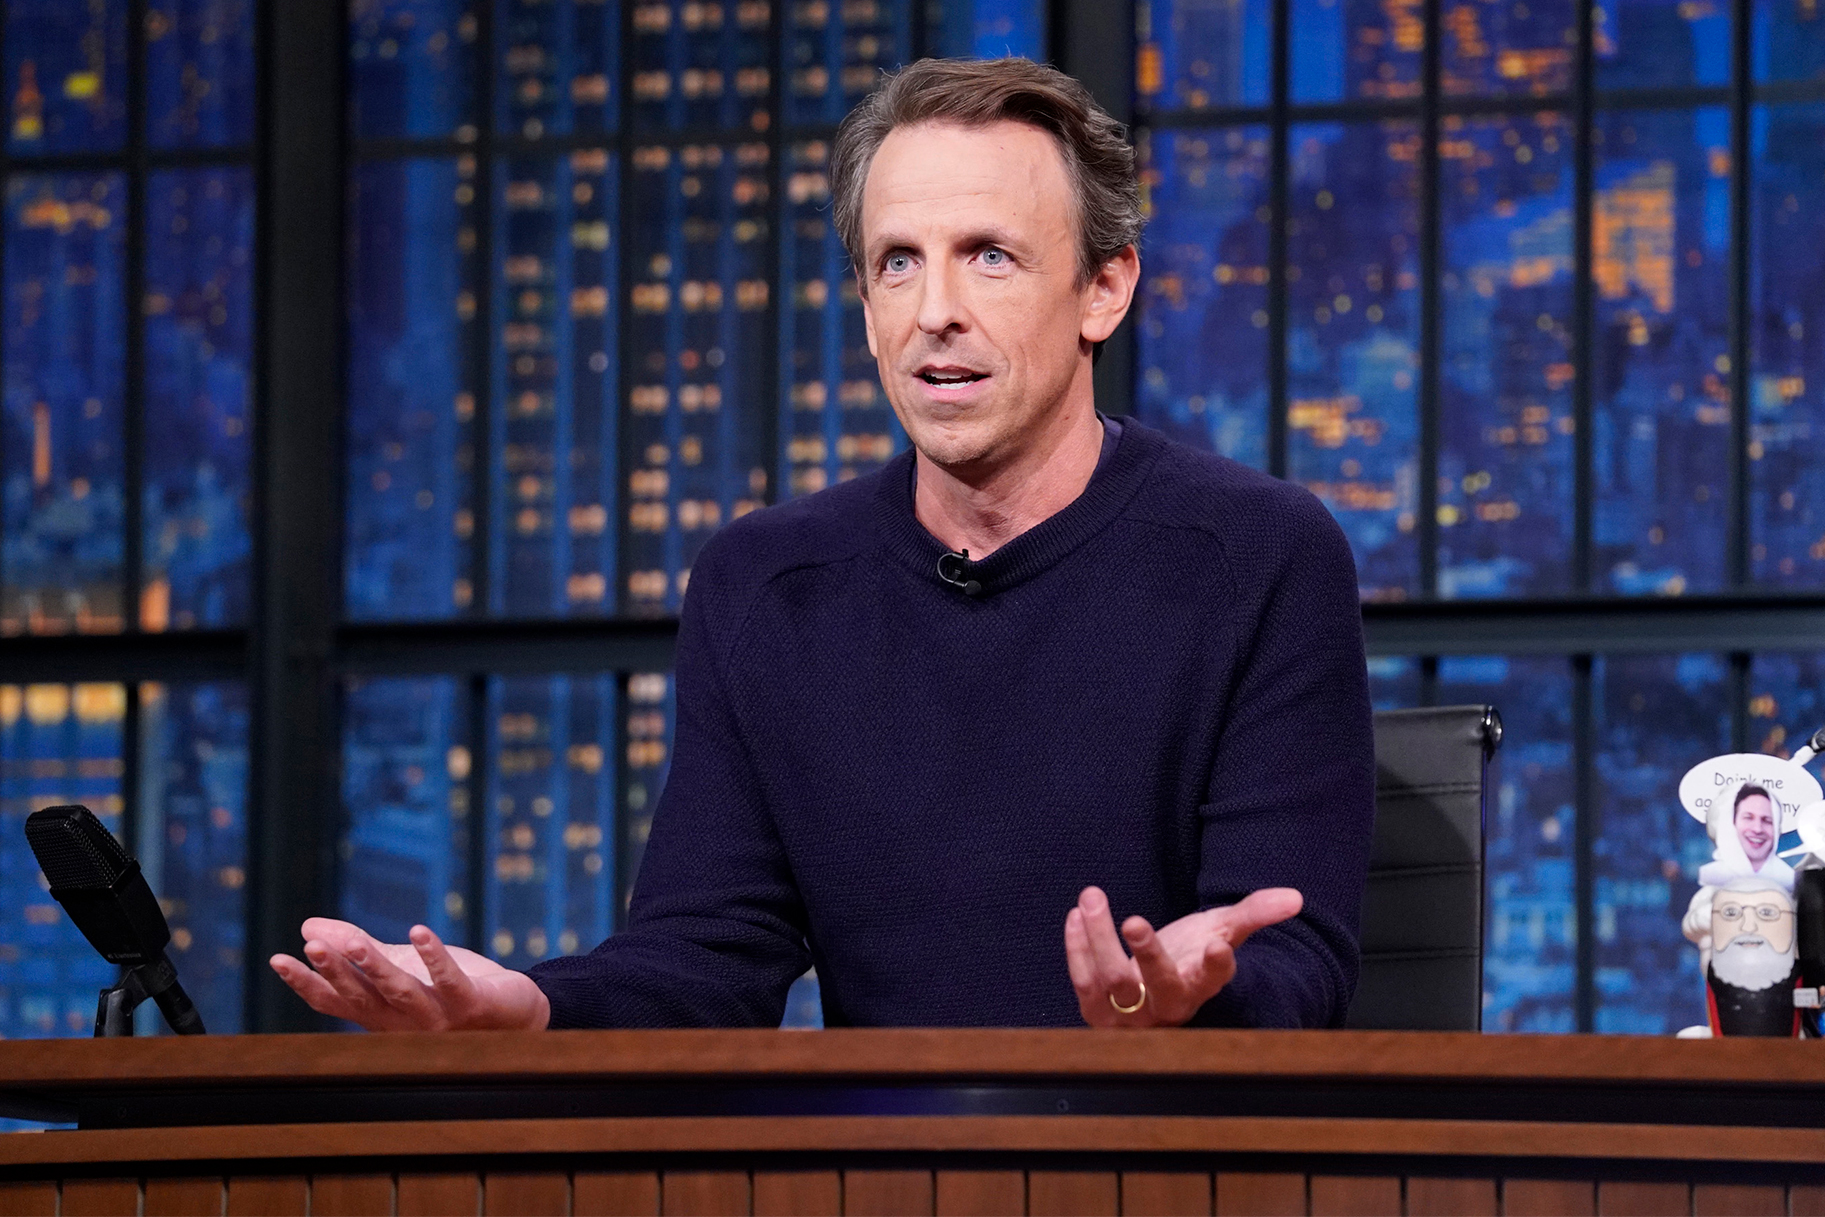 Whos On Late Night With Seth Meyers The Week Of January 1 January 5 Seth Meyers Guests Nbc 6423